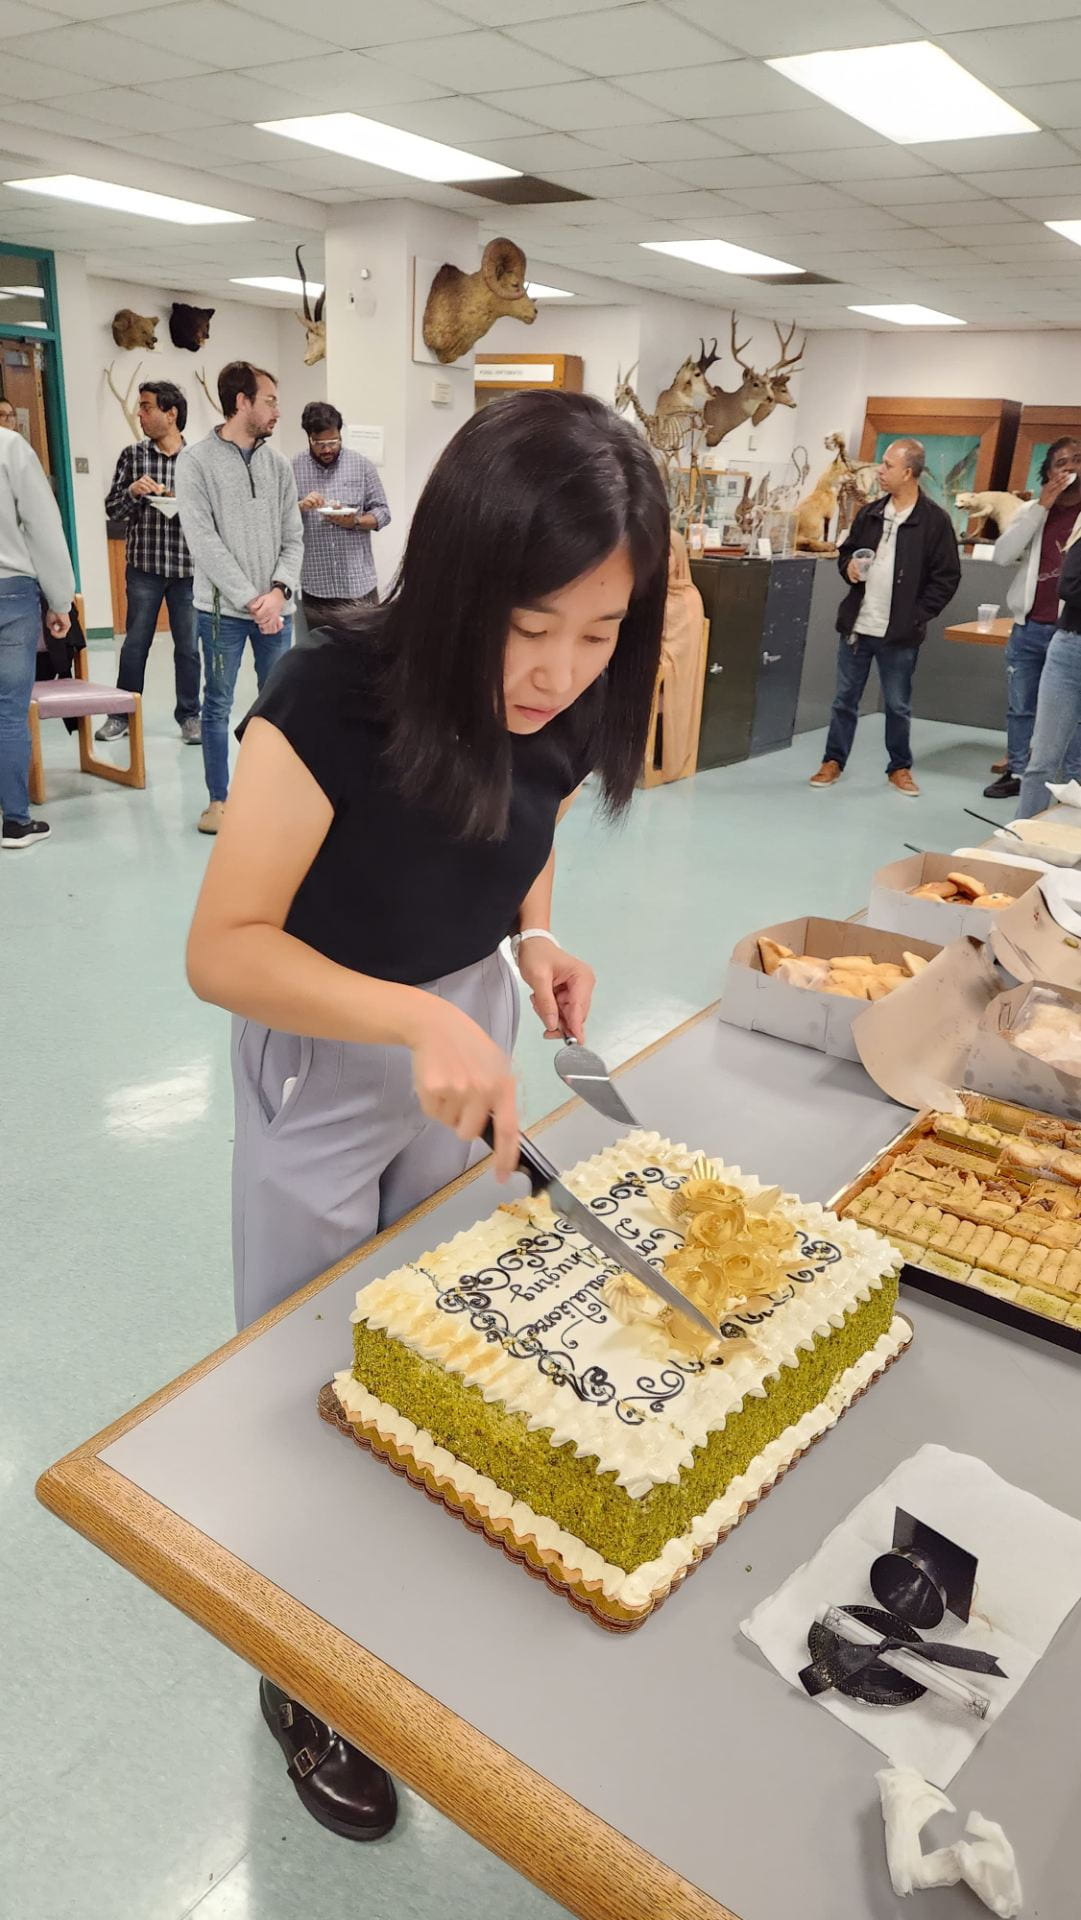 9/29/2023: Congratulations to our newest Ph.D., Dr. Zhuqing Liang